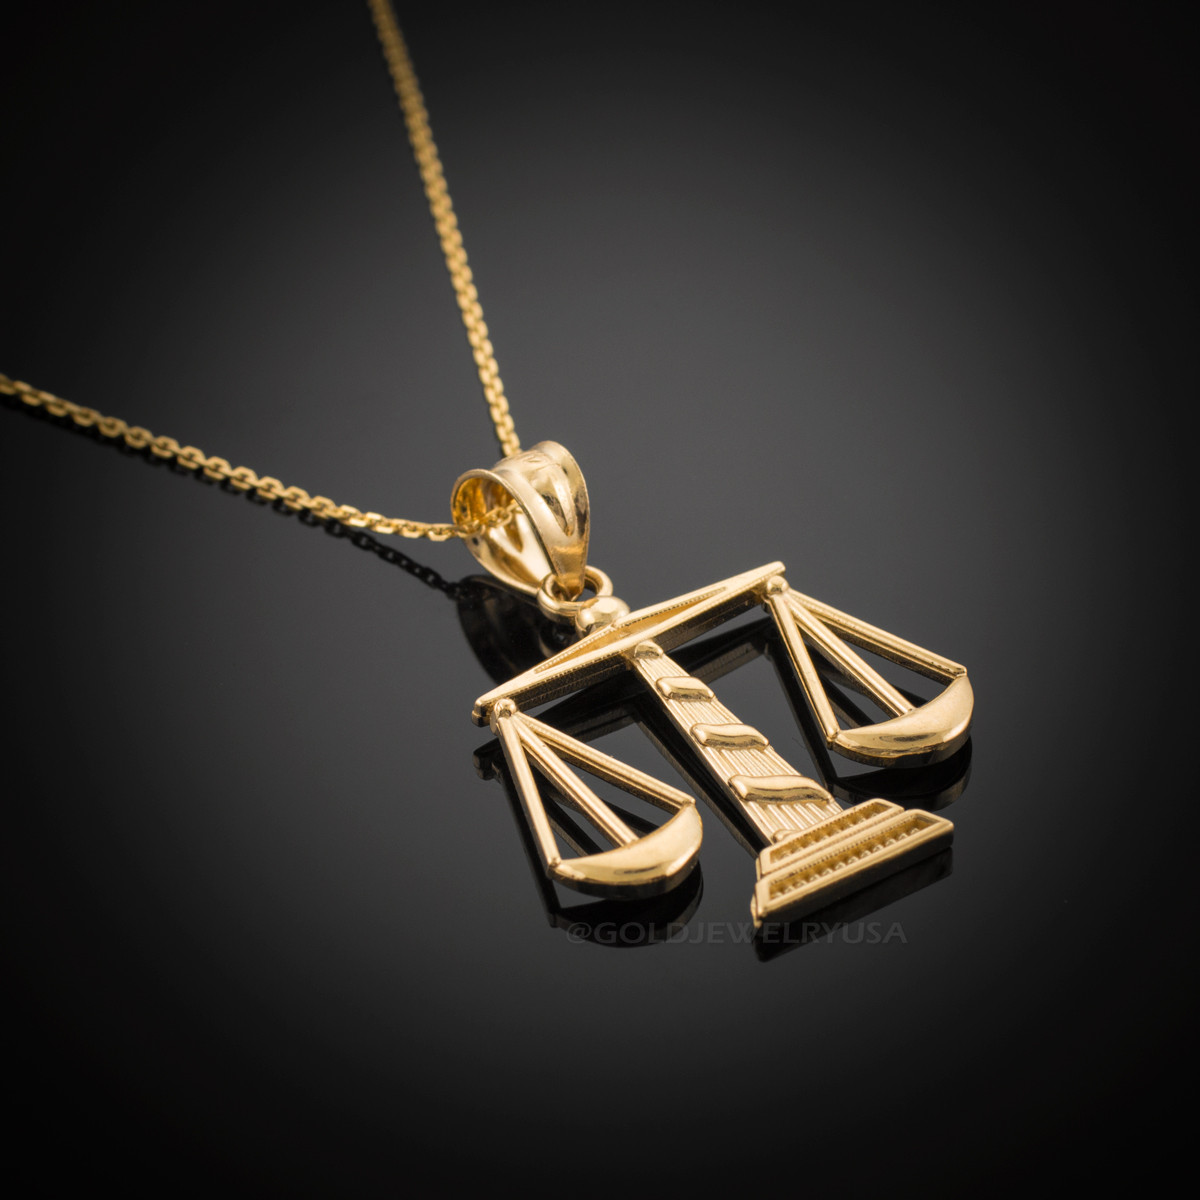 Gold Scales of Justice Pendant Necklace